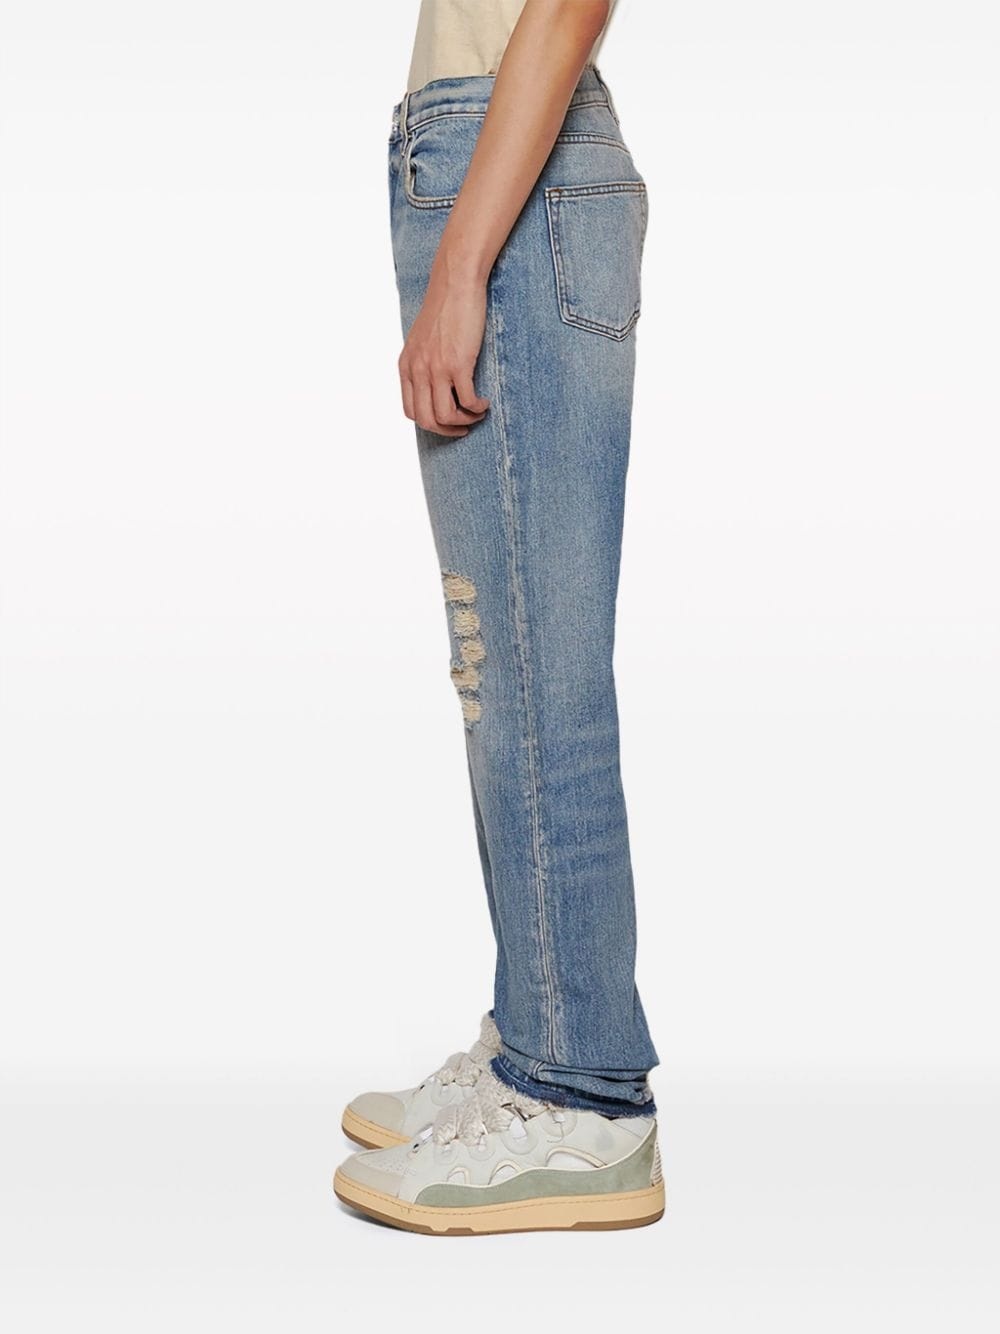 South Pointe 5001 jeans - 4